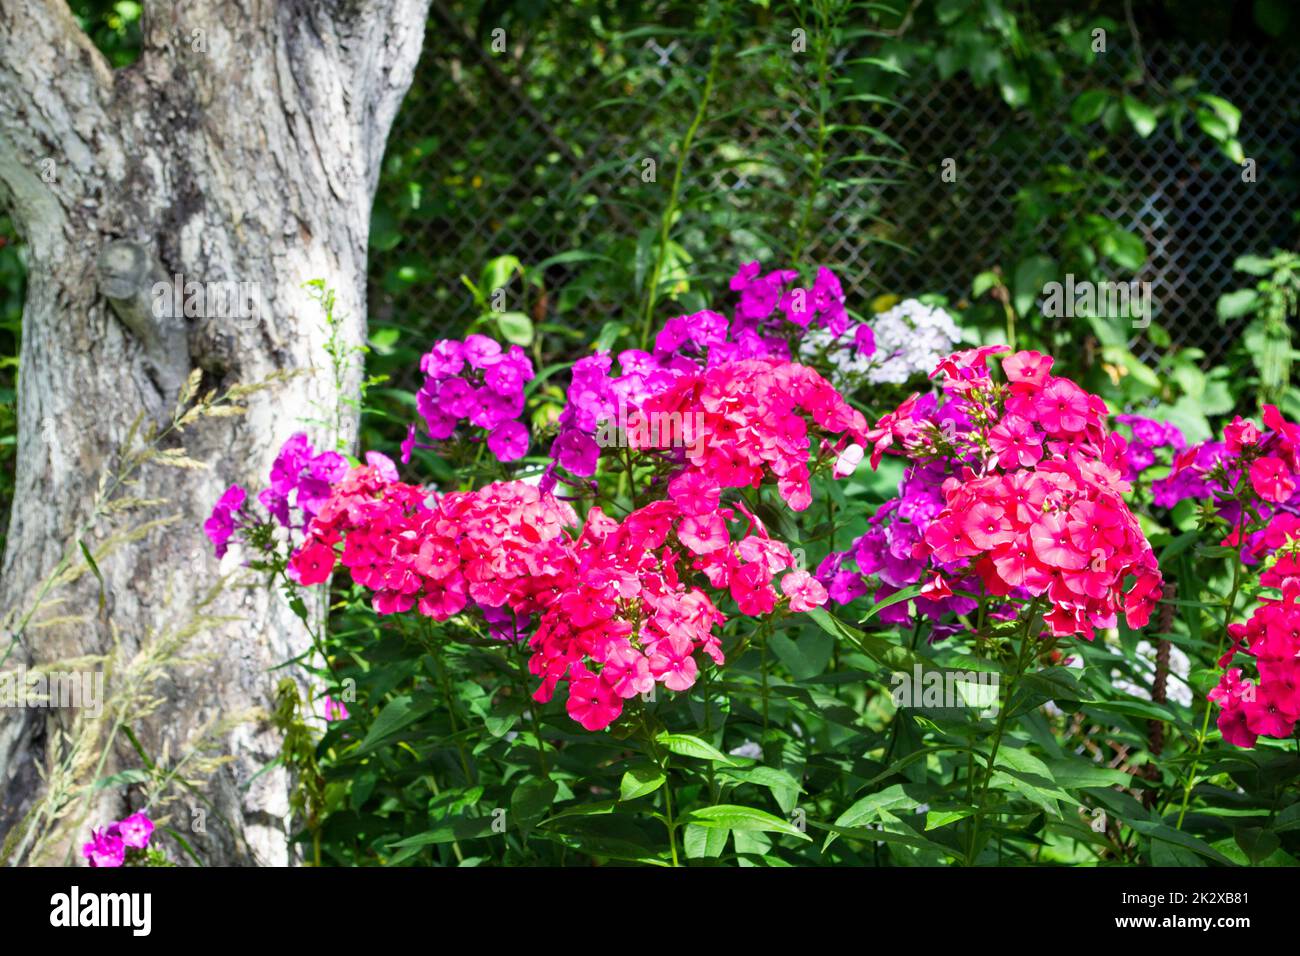 Garden phlox paniculata, bright summer flowers. Blooming branches of phlox in the garden on a sunny day. Stock Photo